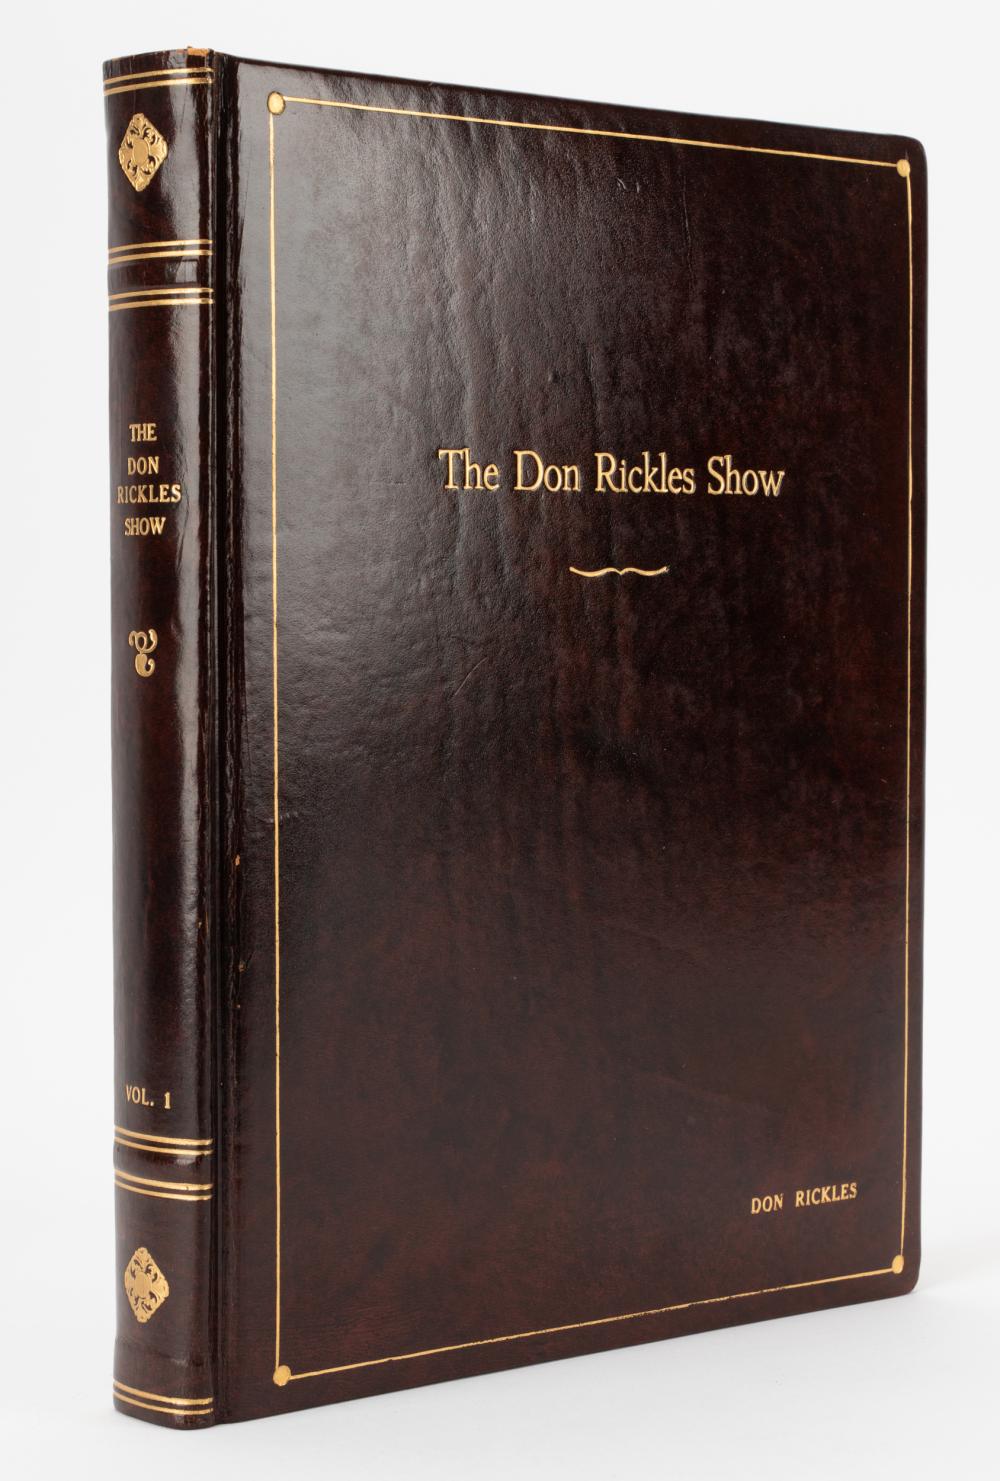 DON RICKLES THE DON RICKLES SHOW 330238